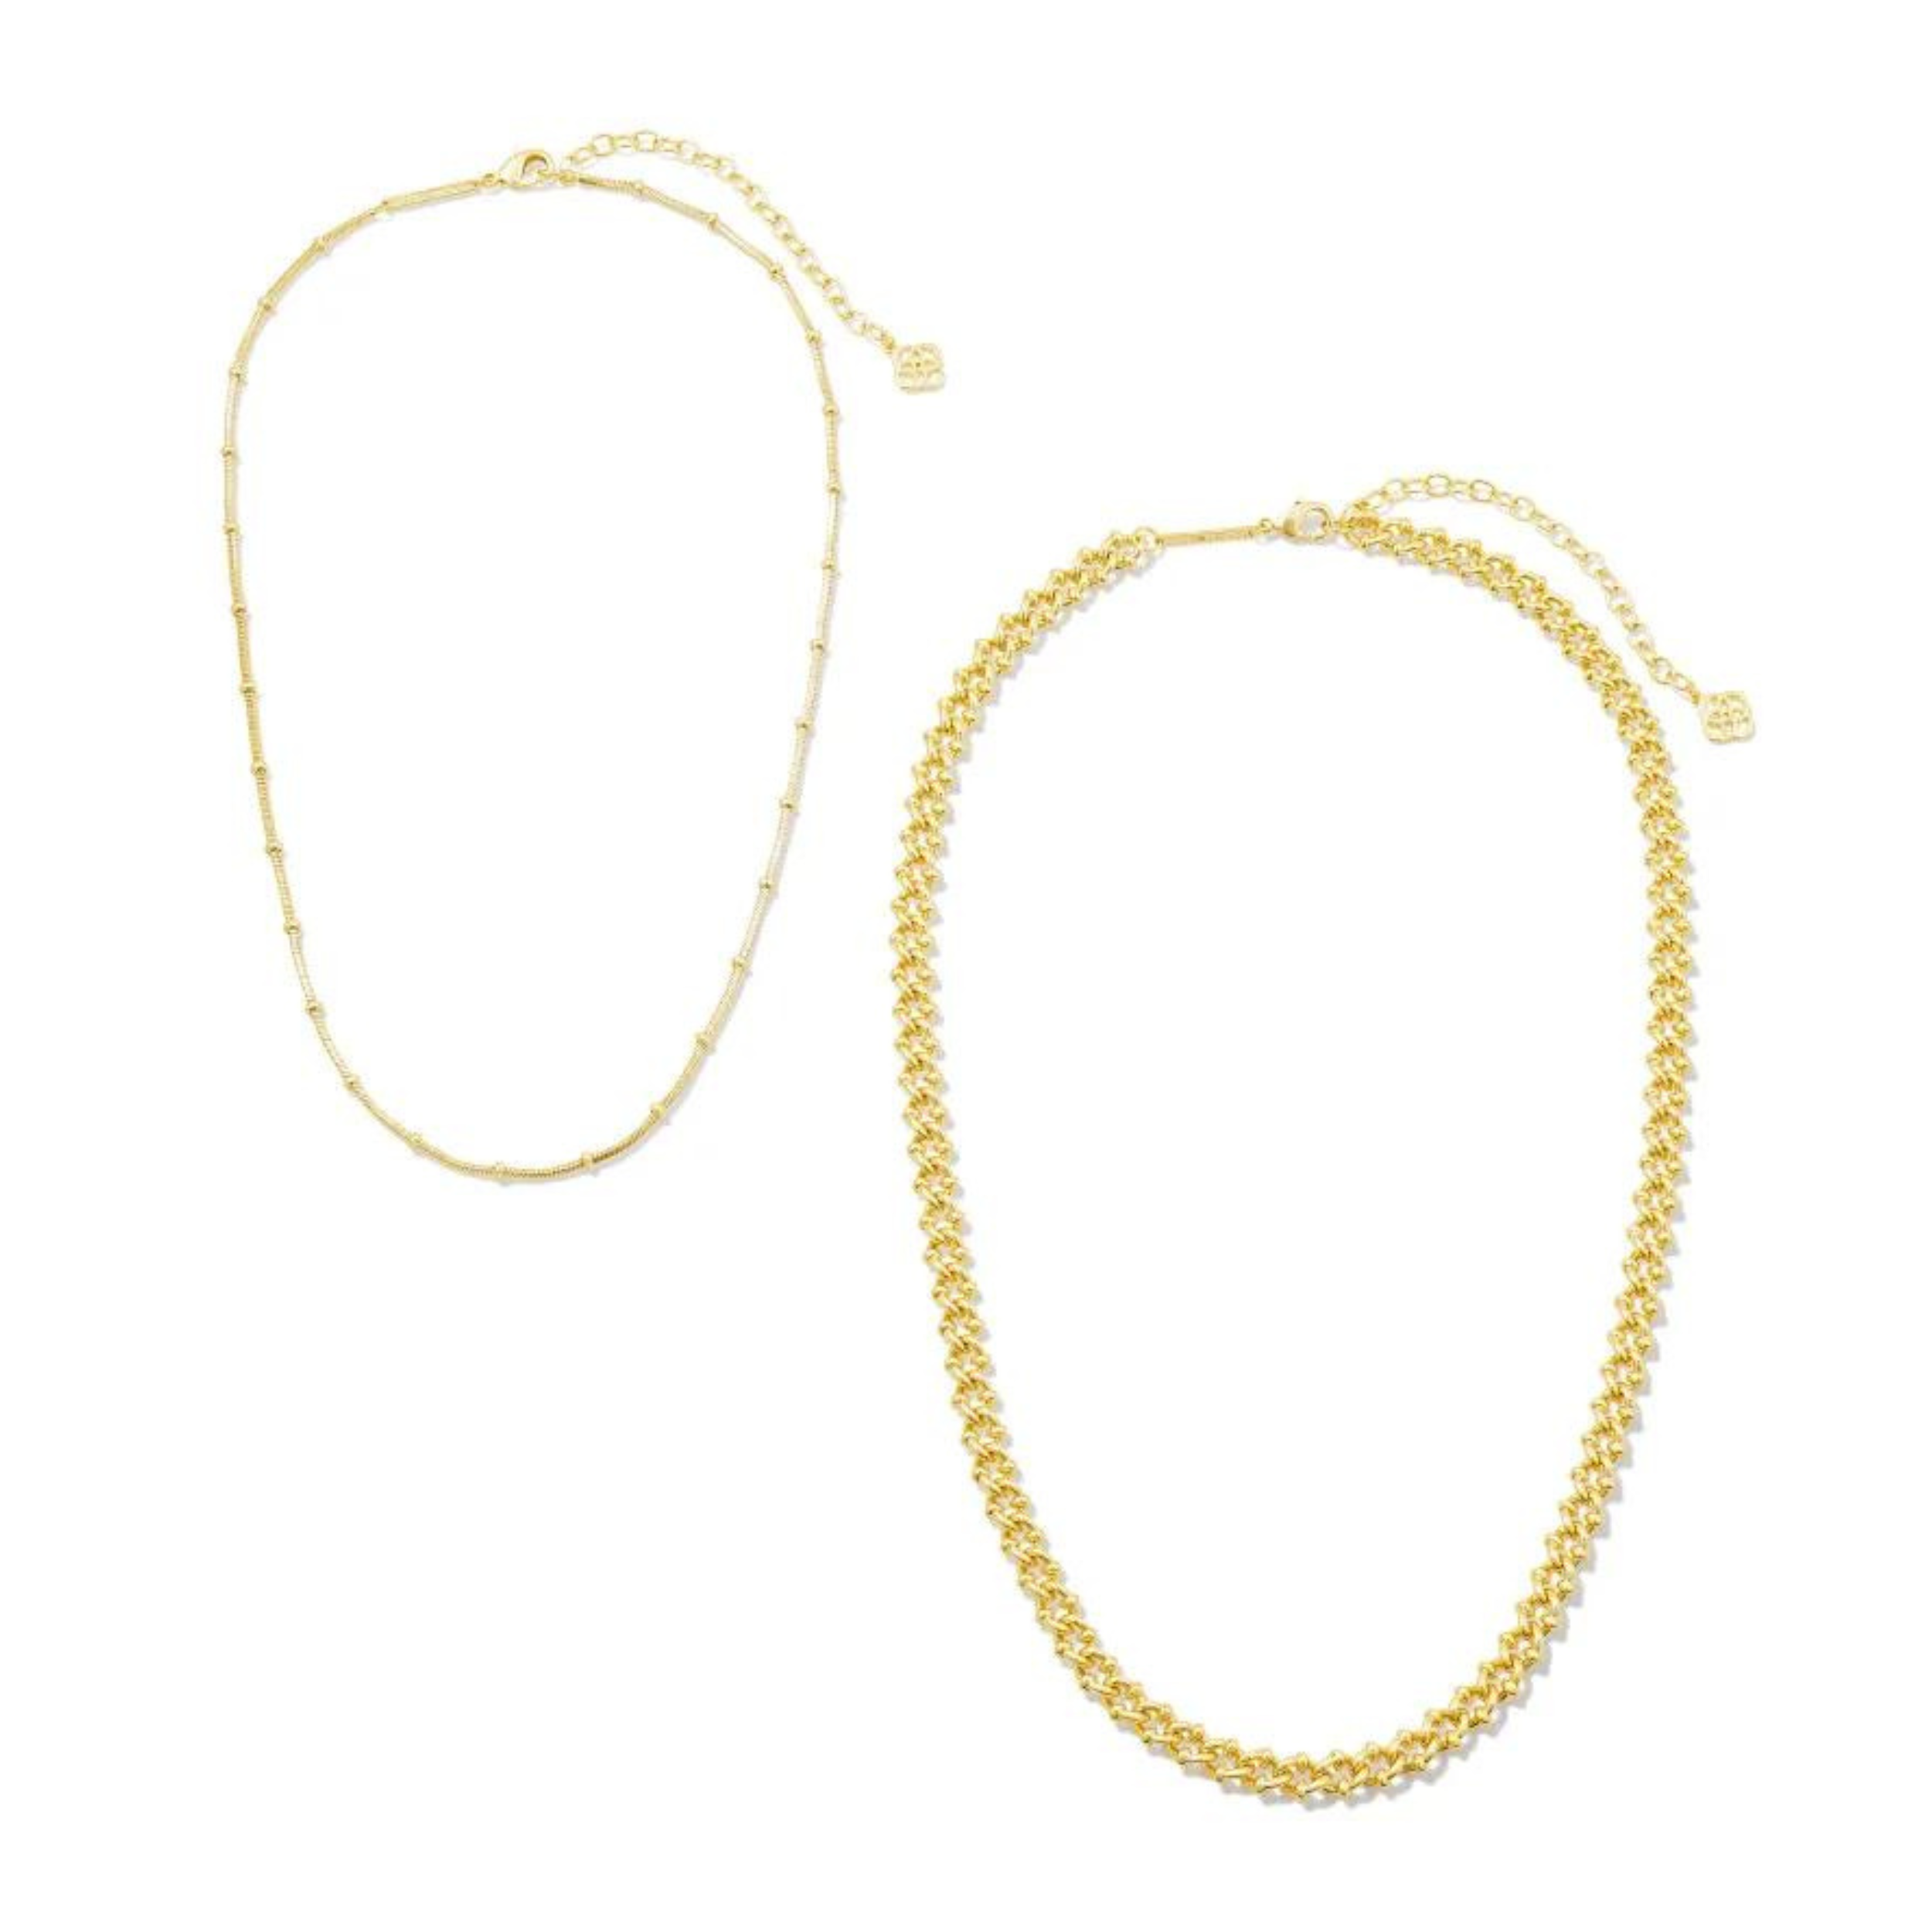 Kendra Scott | Lonnie Set of 2 Chain Necklaces in Gold - Giddy Up Glamour Boutique